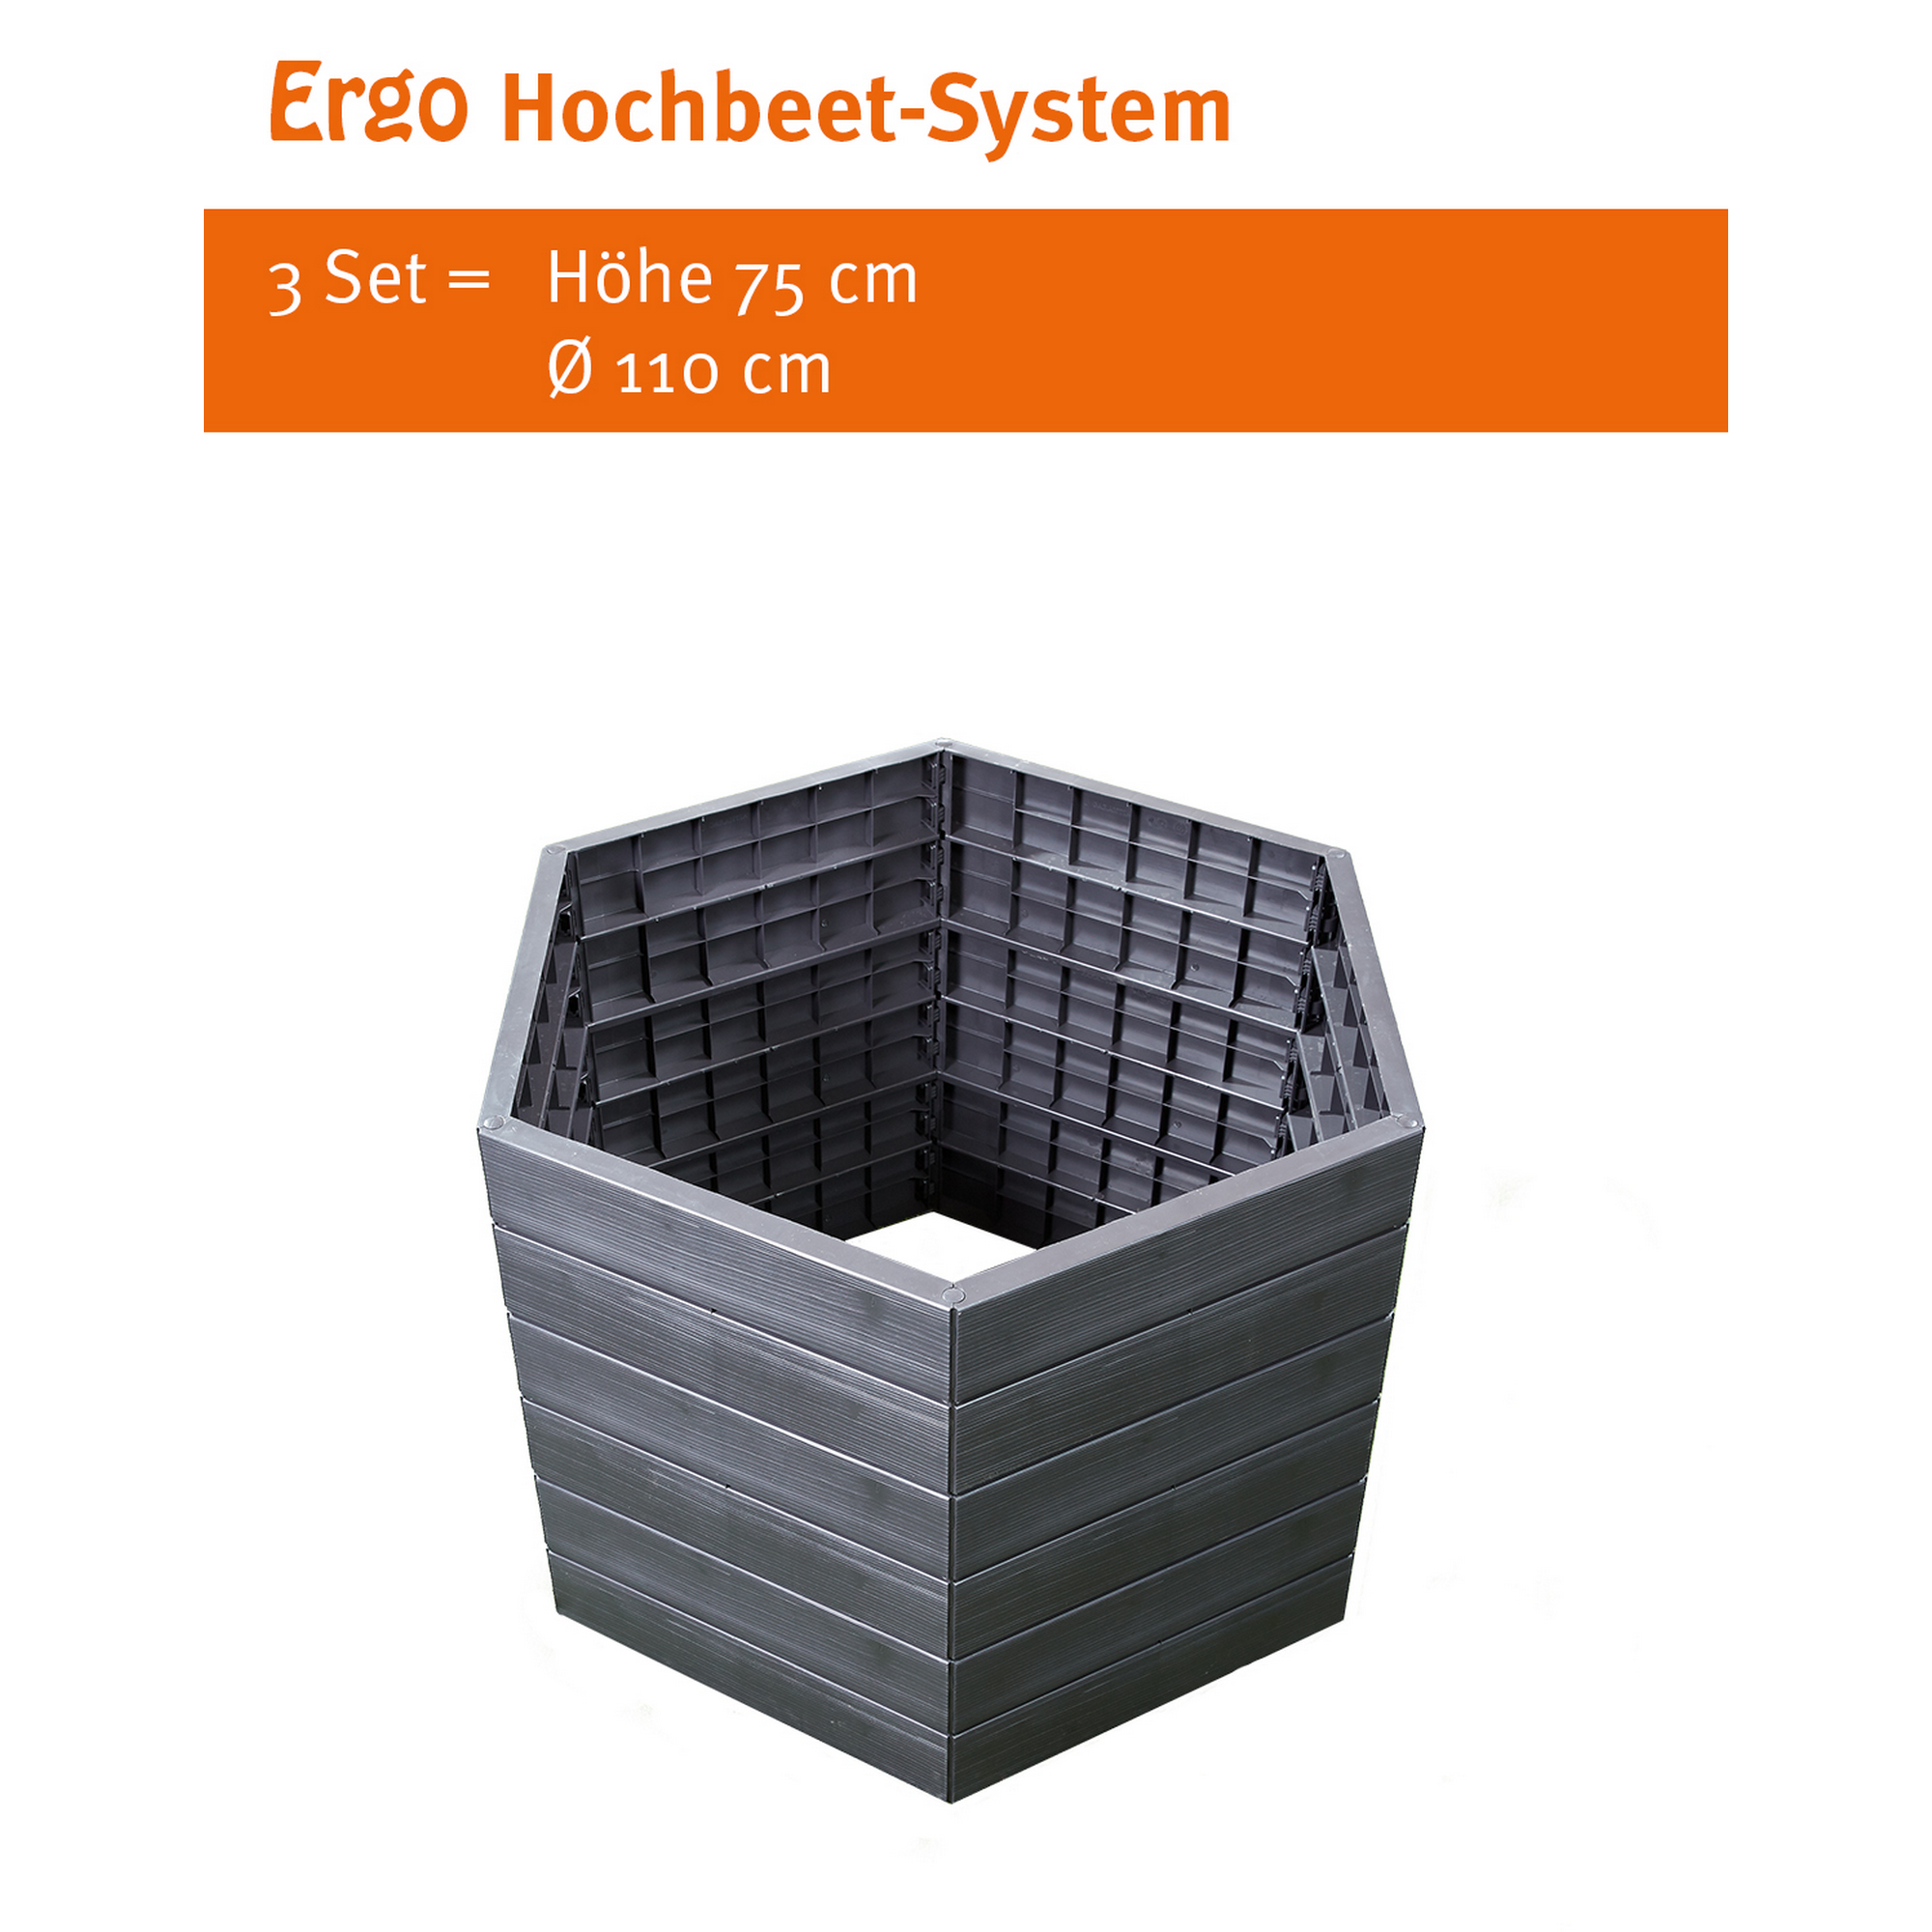 Hochbeet-System 'Ergo' + product picture